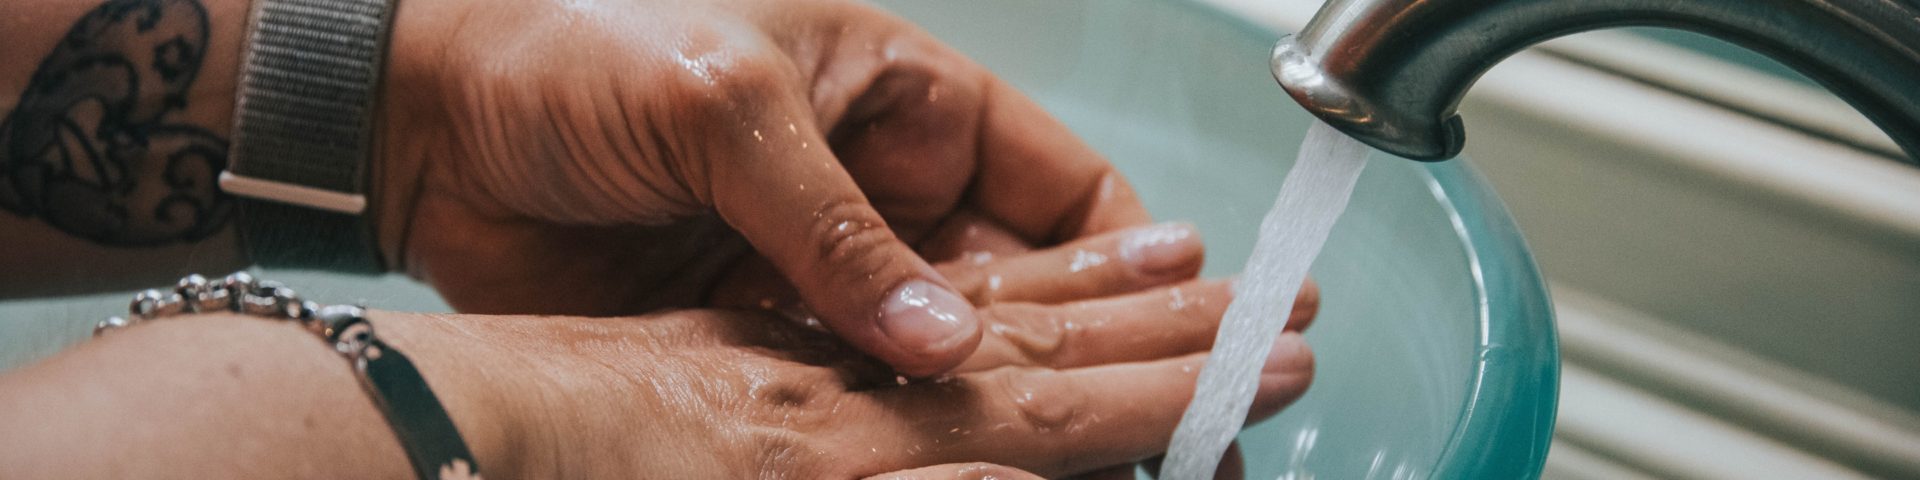 Hands being washed under running water over blue glass sink